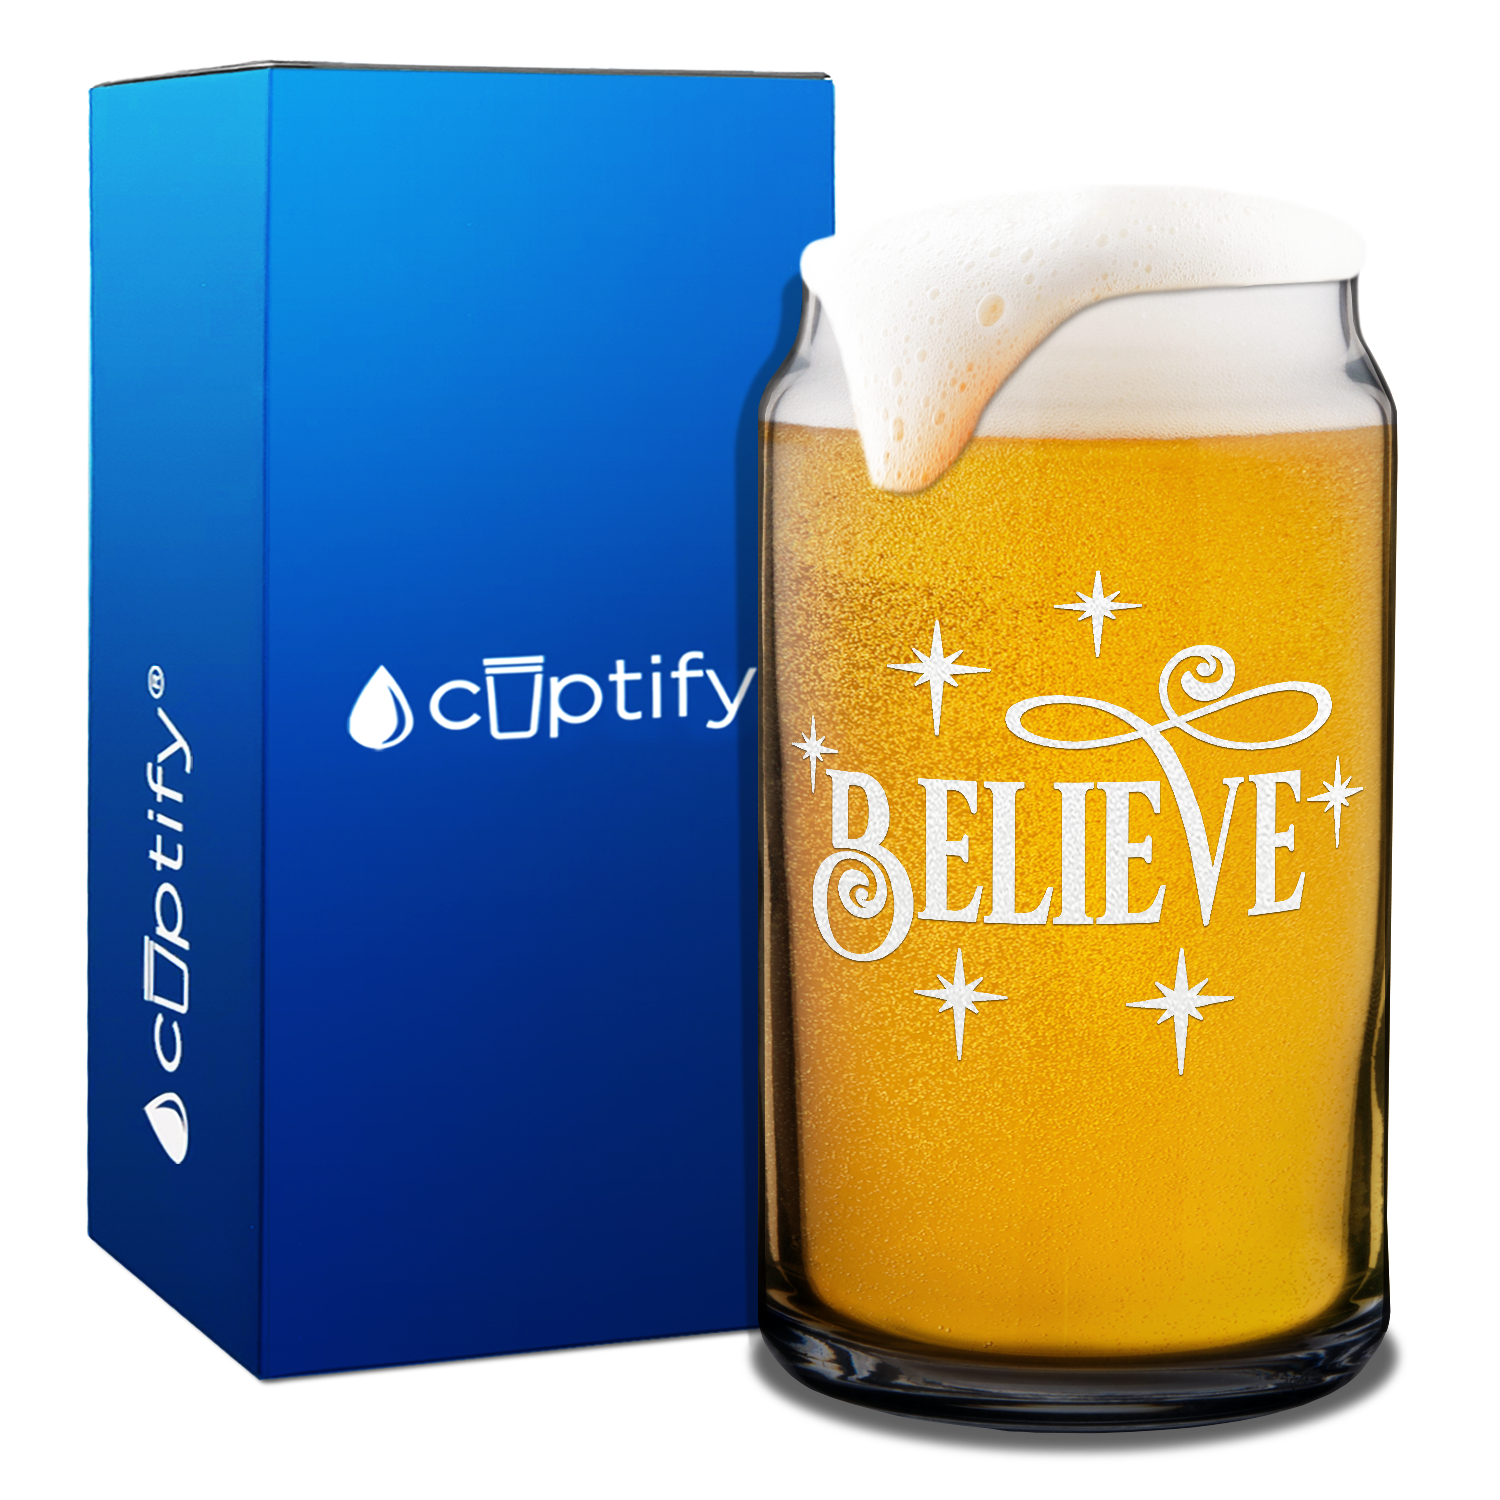 Believe on 16oz Beer Can Glass